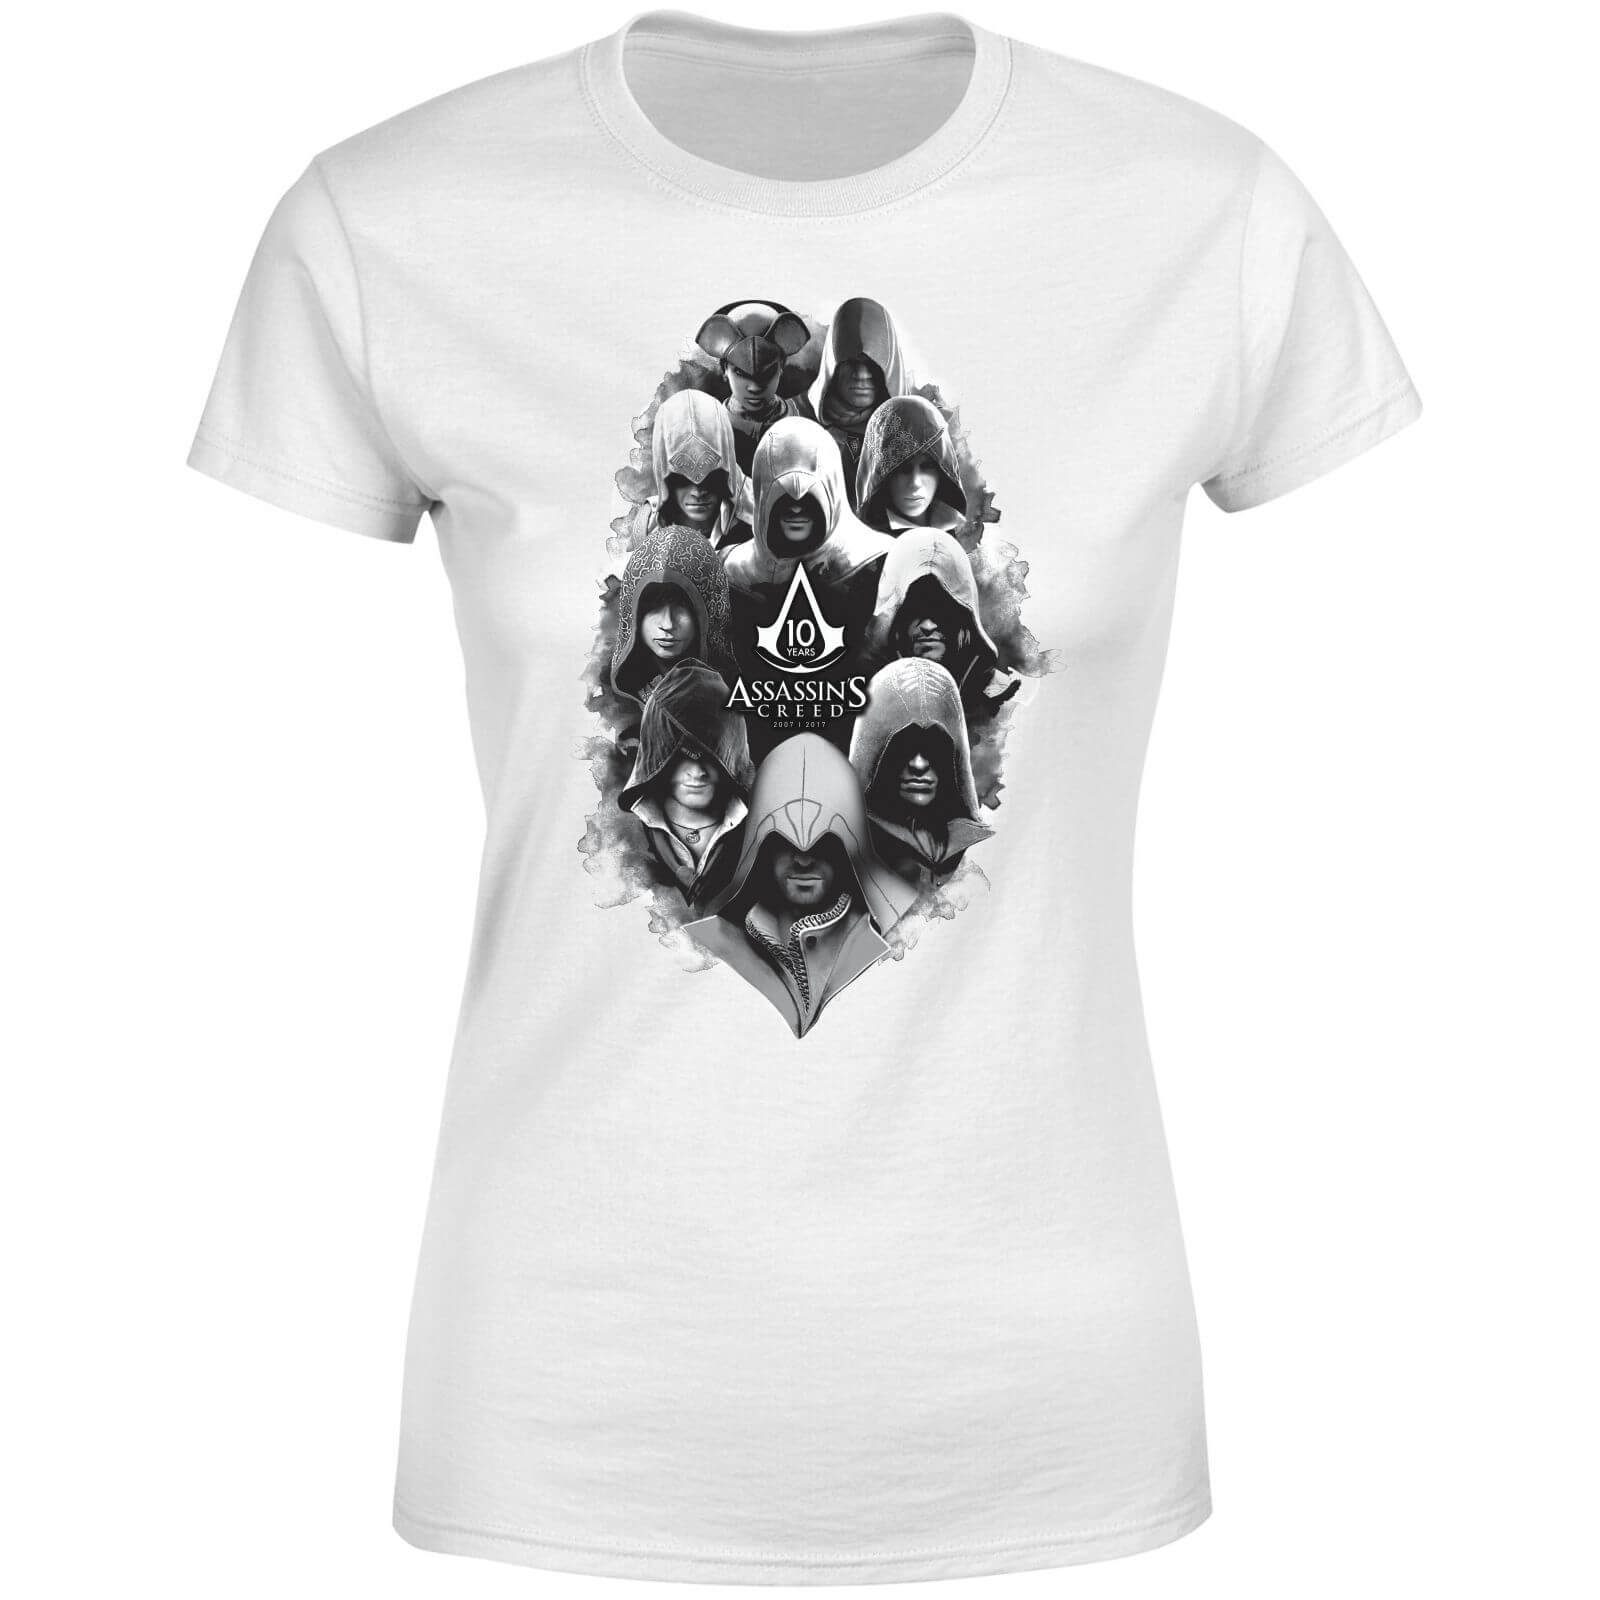 Assassin's Creed Greyscale Hooded Faces Women's T-Shirt - White - XXL - White